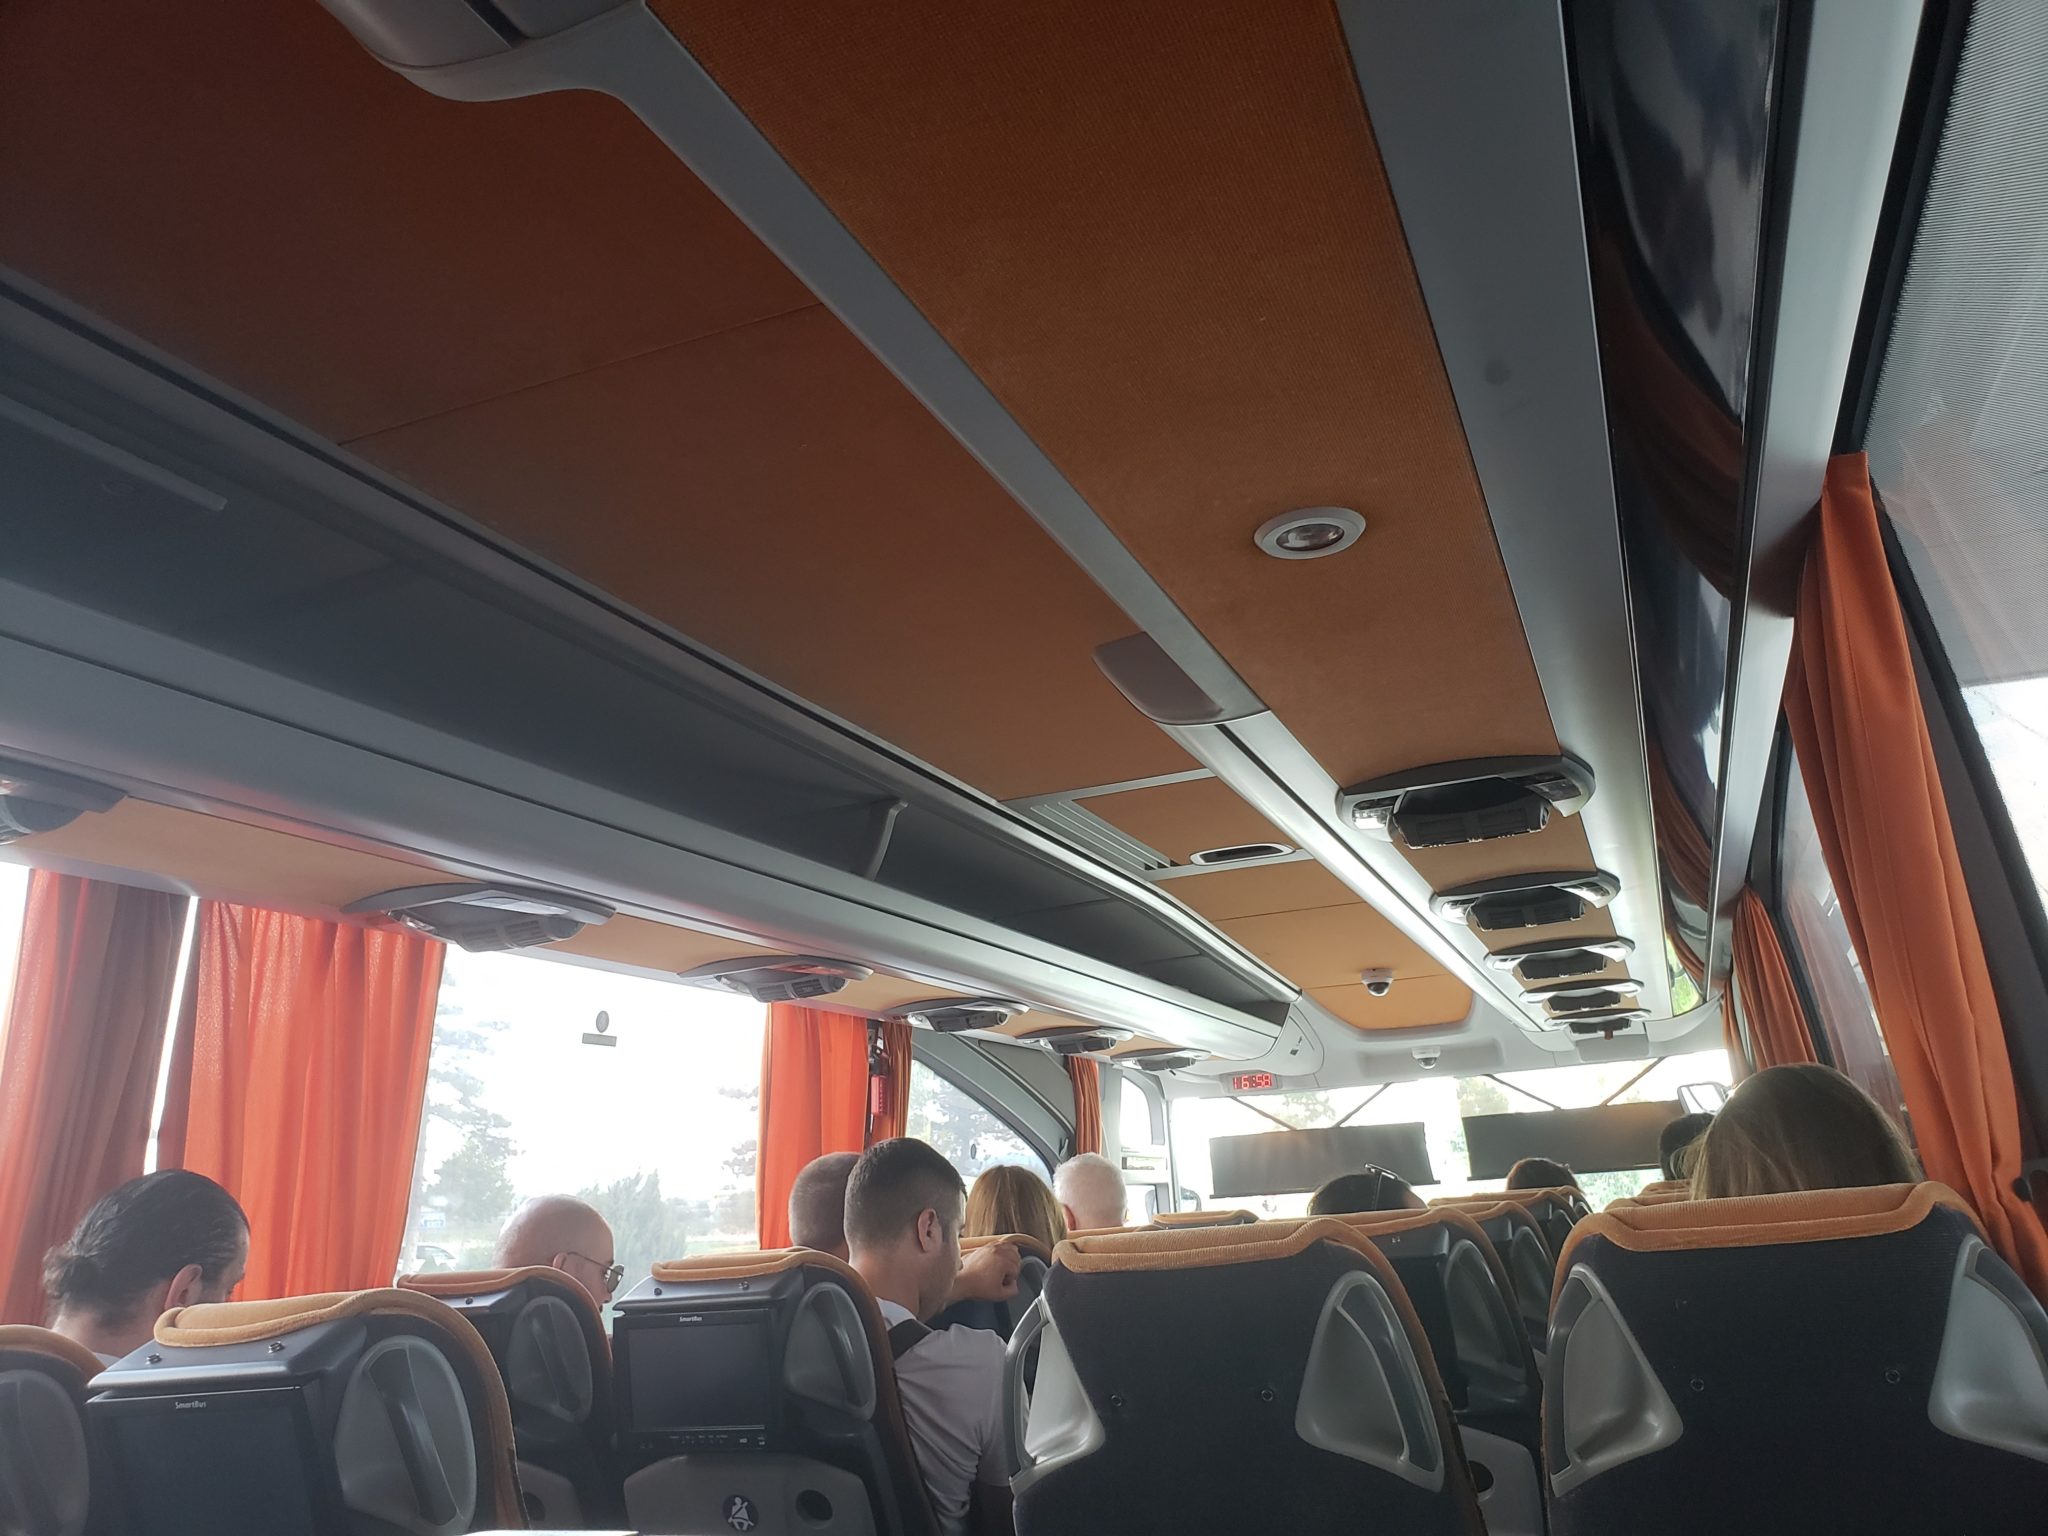 inside a bus with people sitting on seats